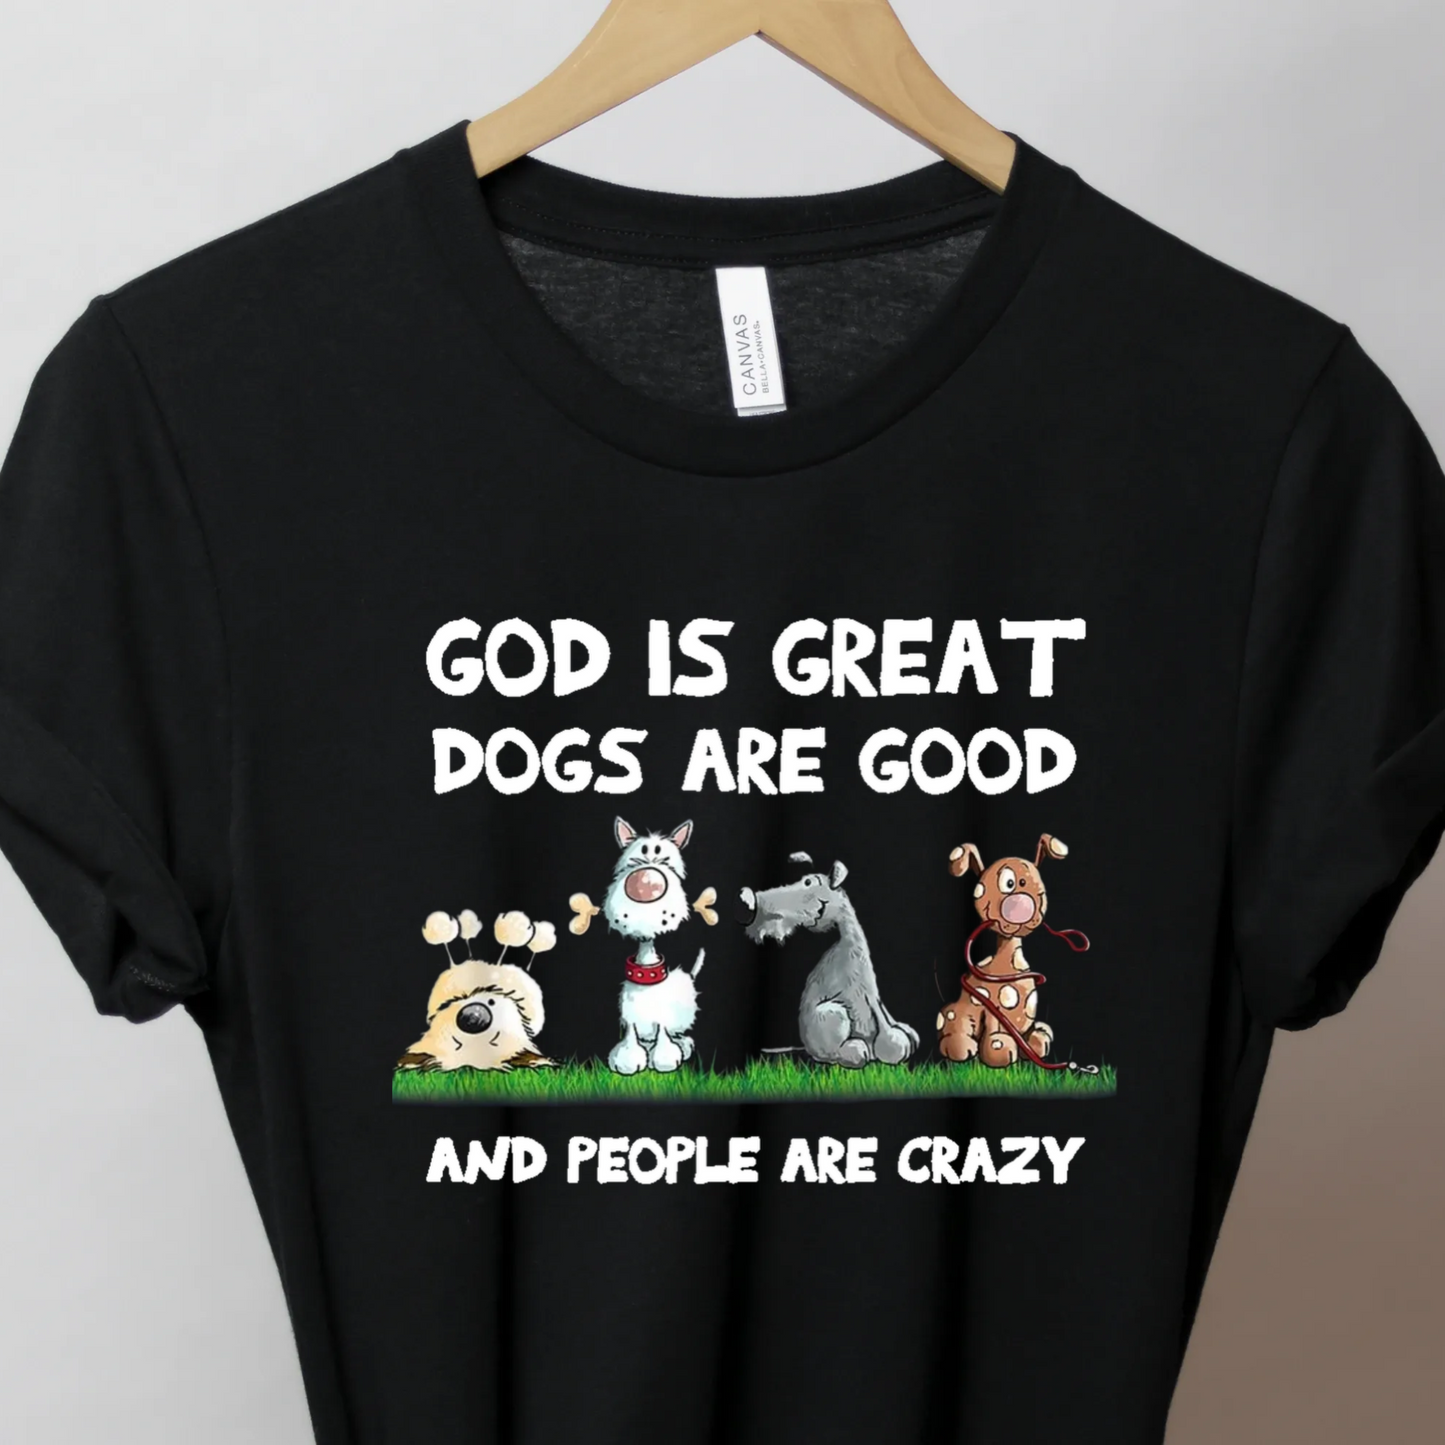 Dogs Are Good T-Shirt